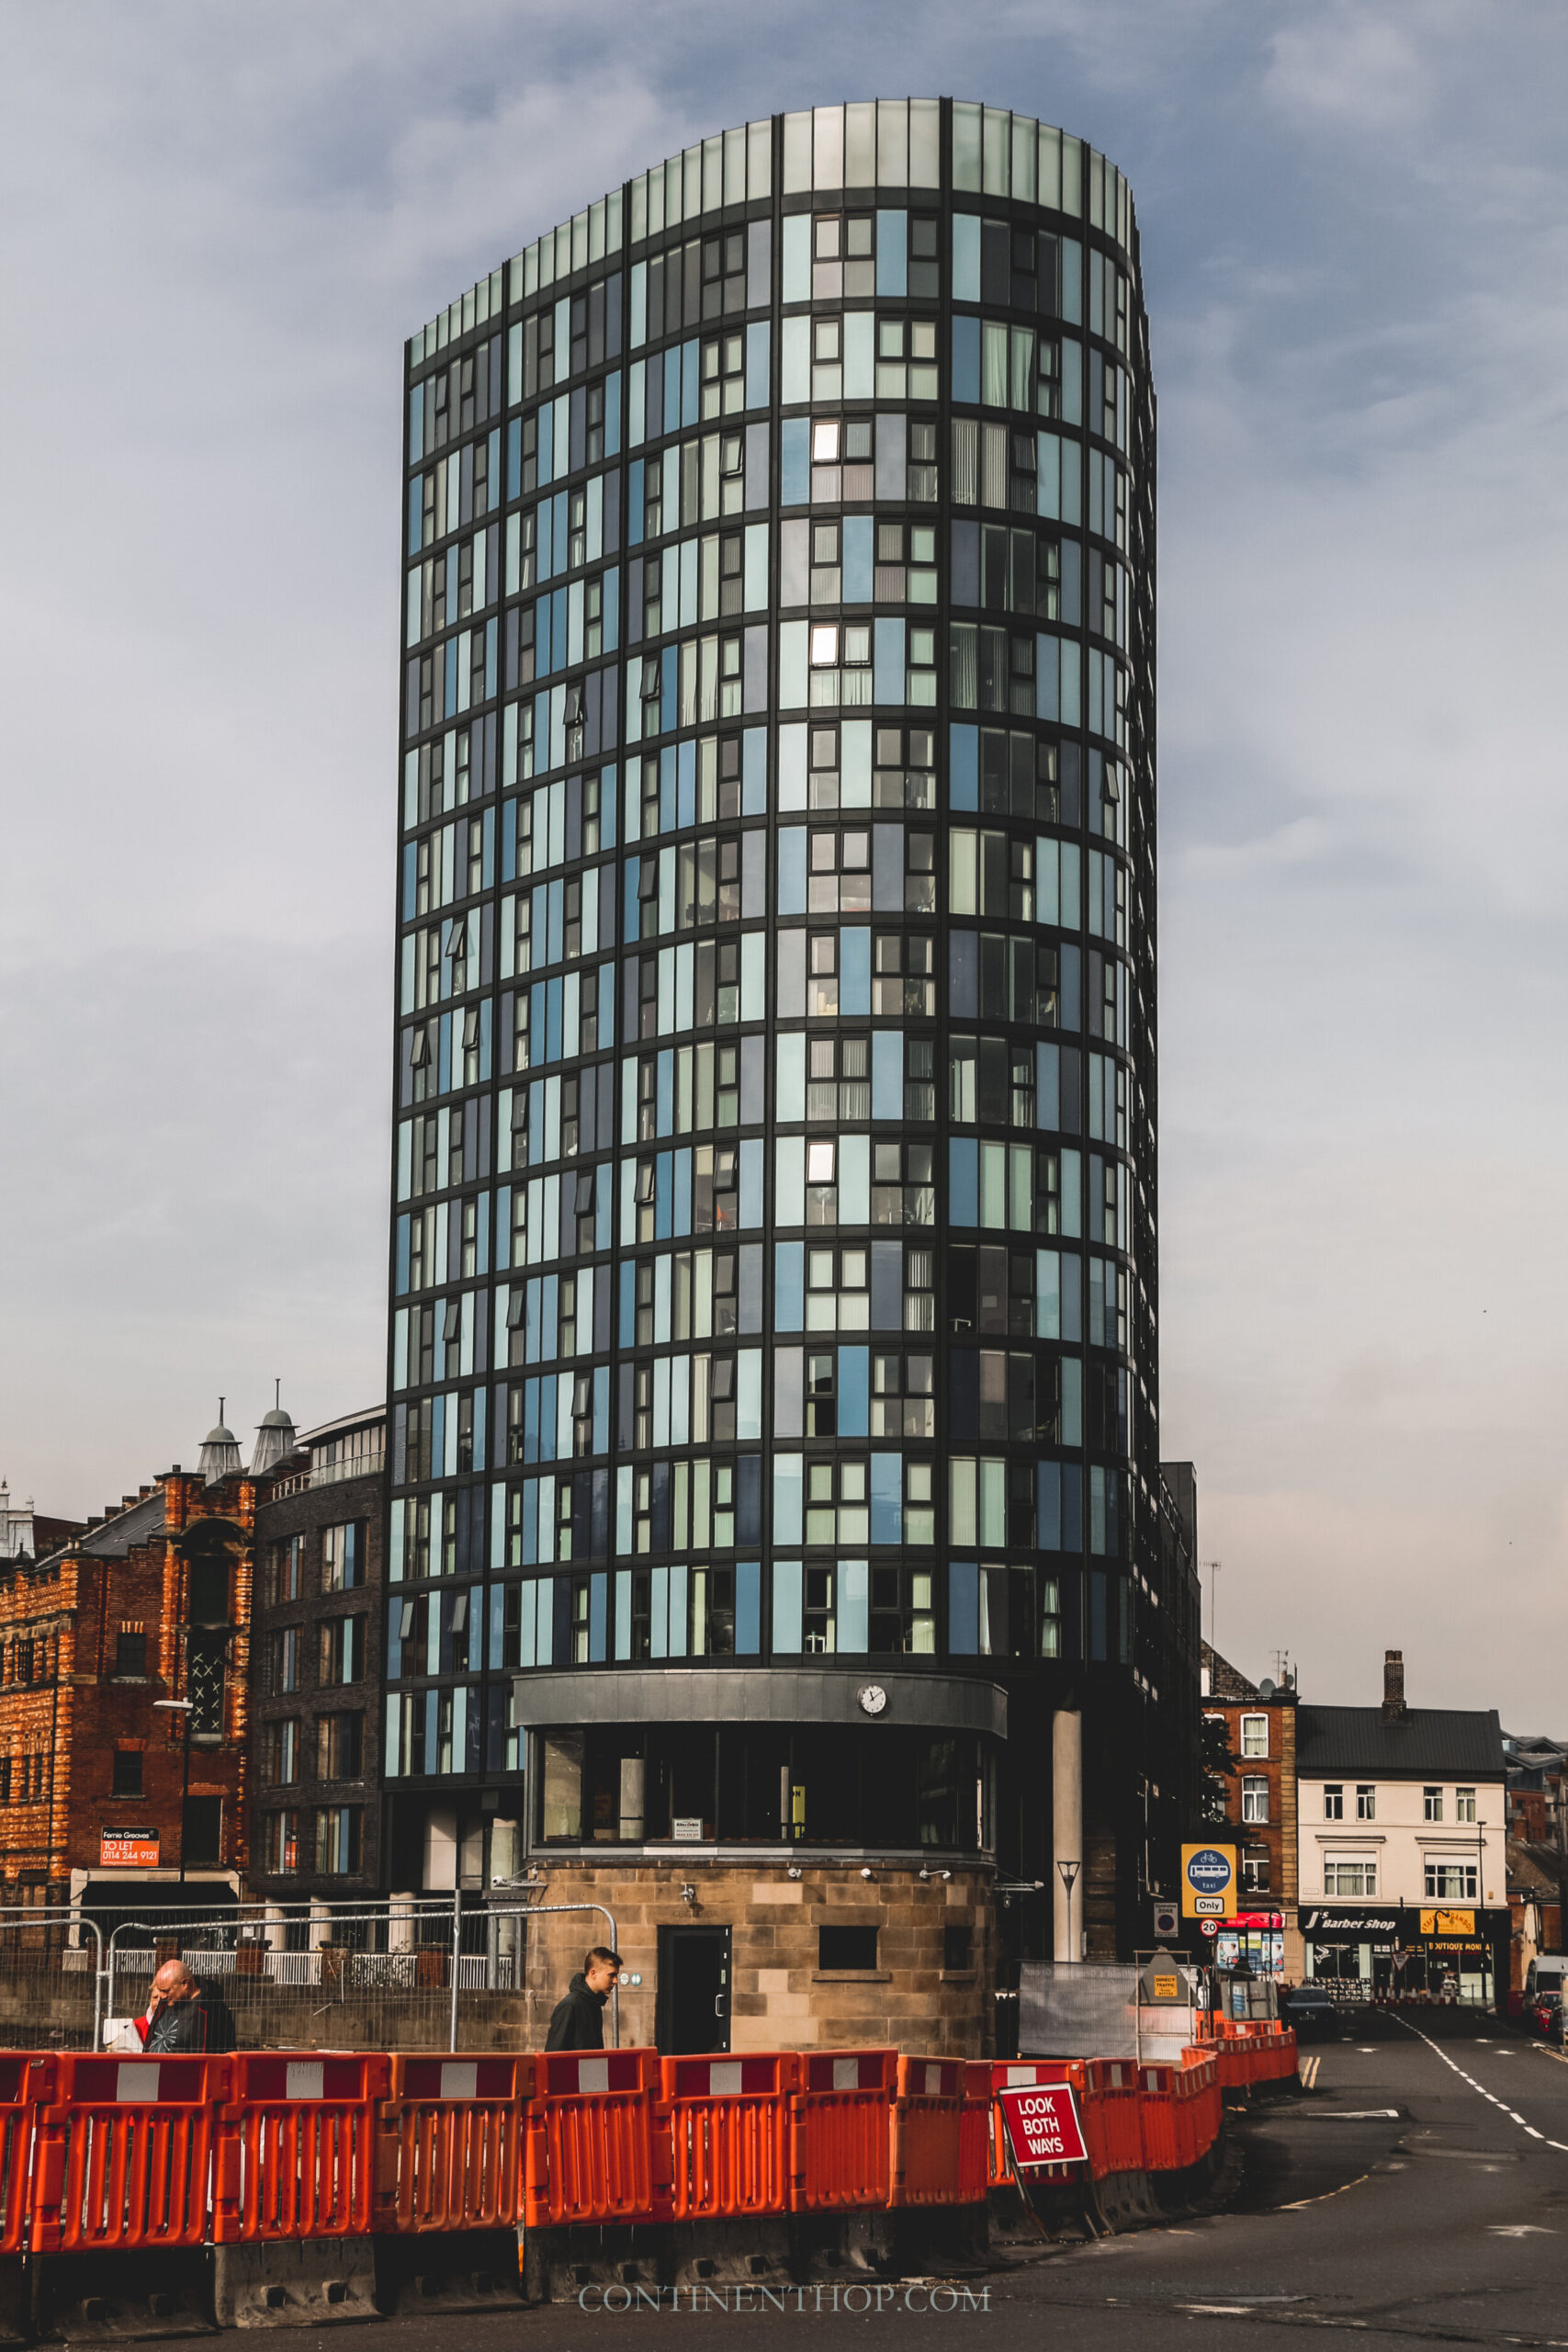 A shiny high rise building in Sheffield England